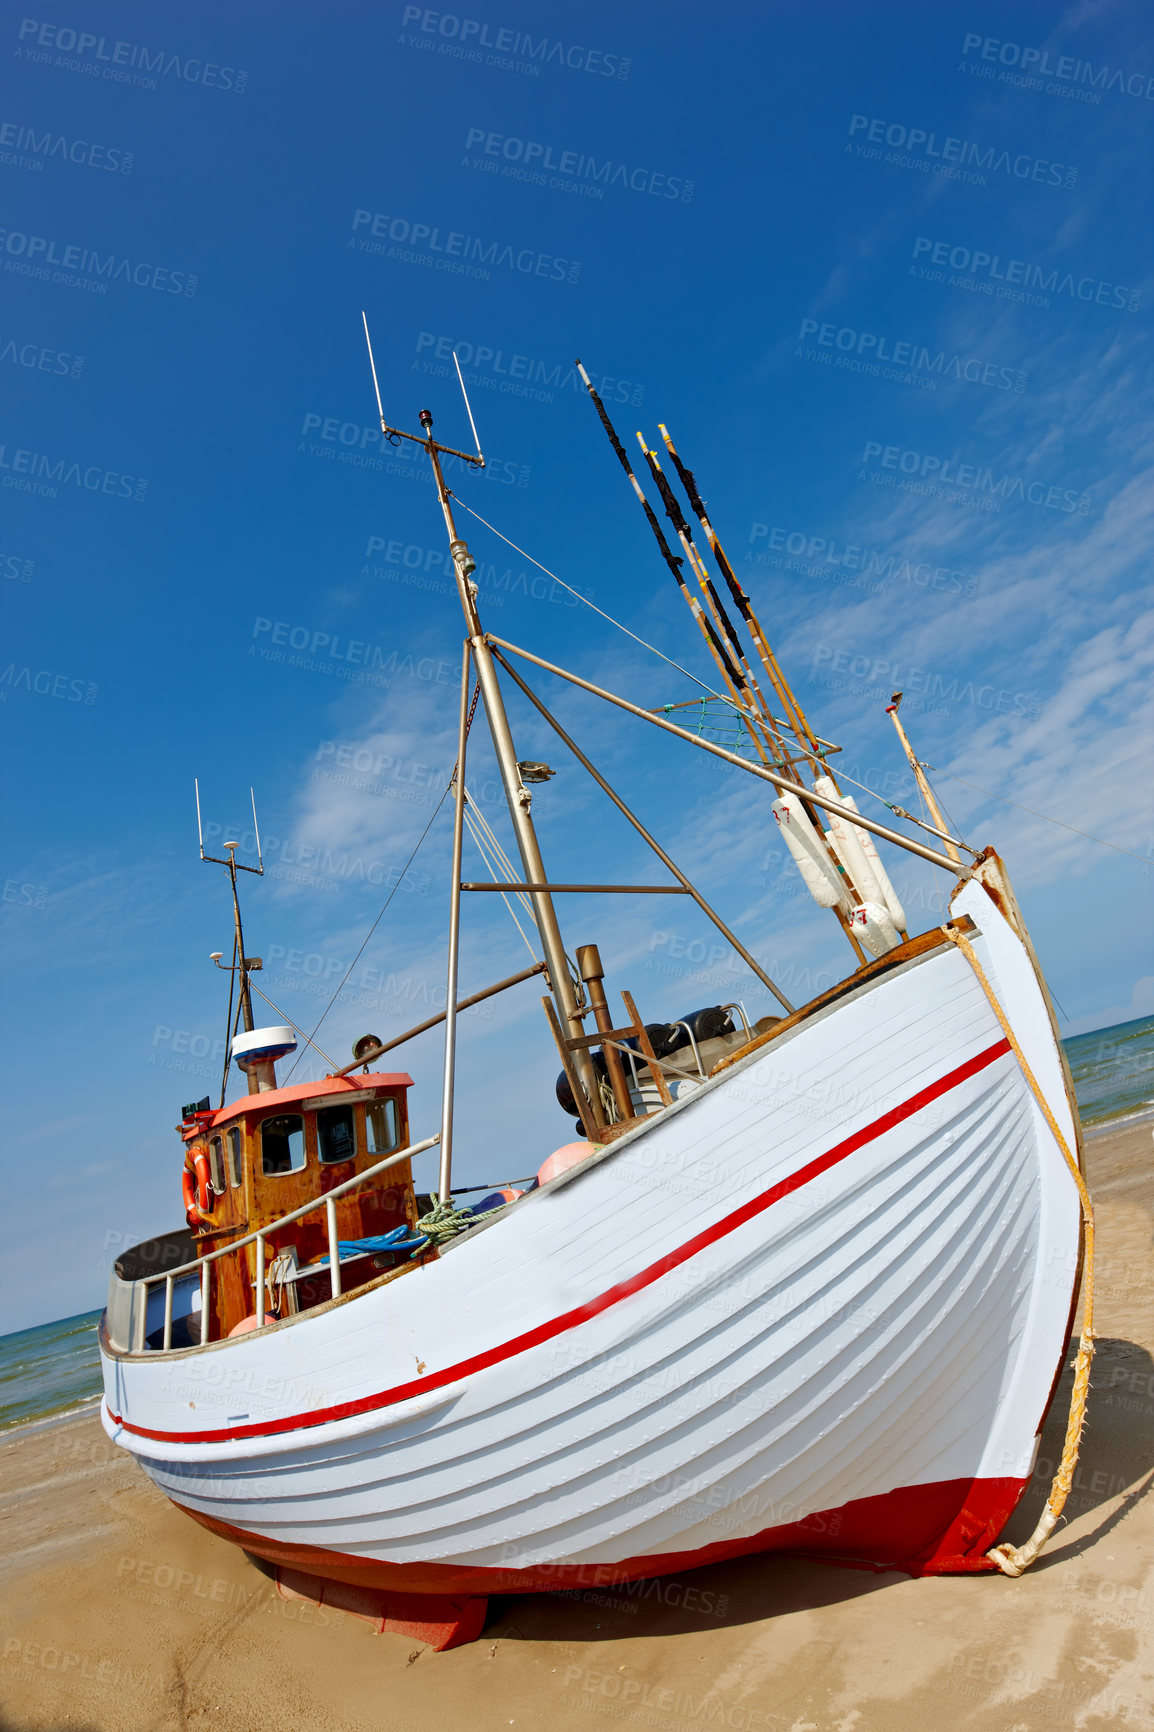 Buy stock photo A photo of a Danish fishing boat at the beach